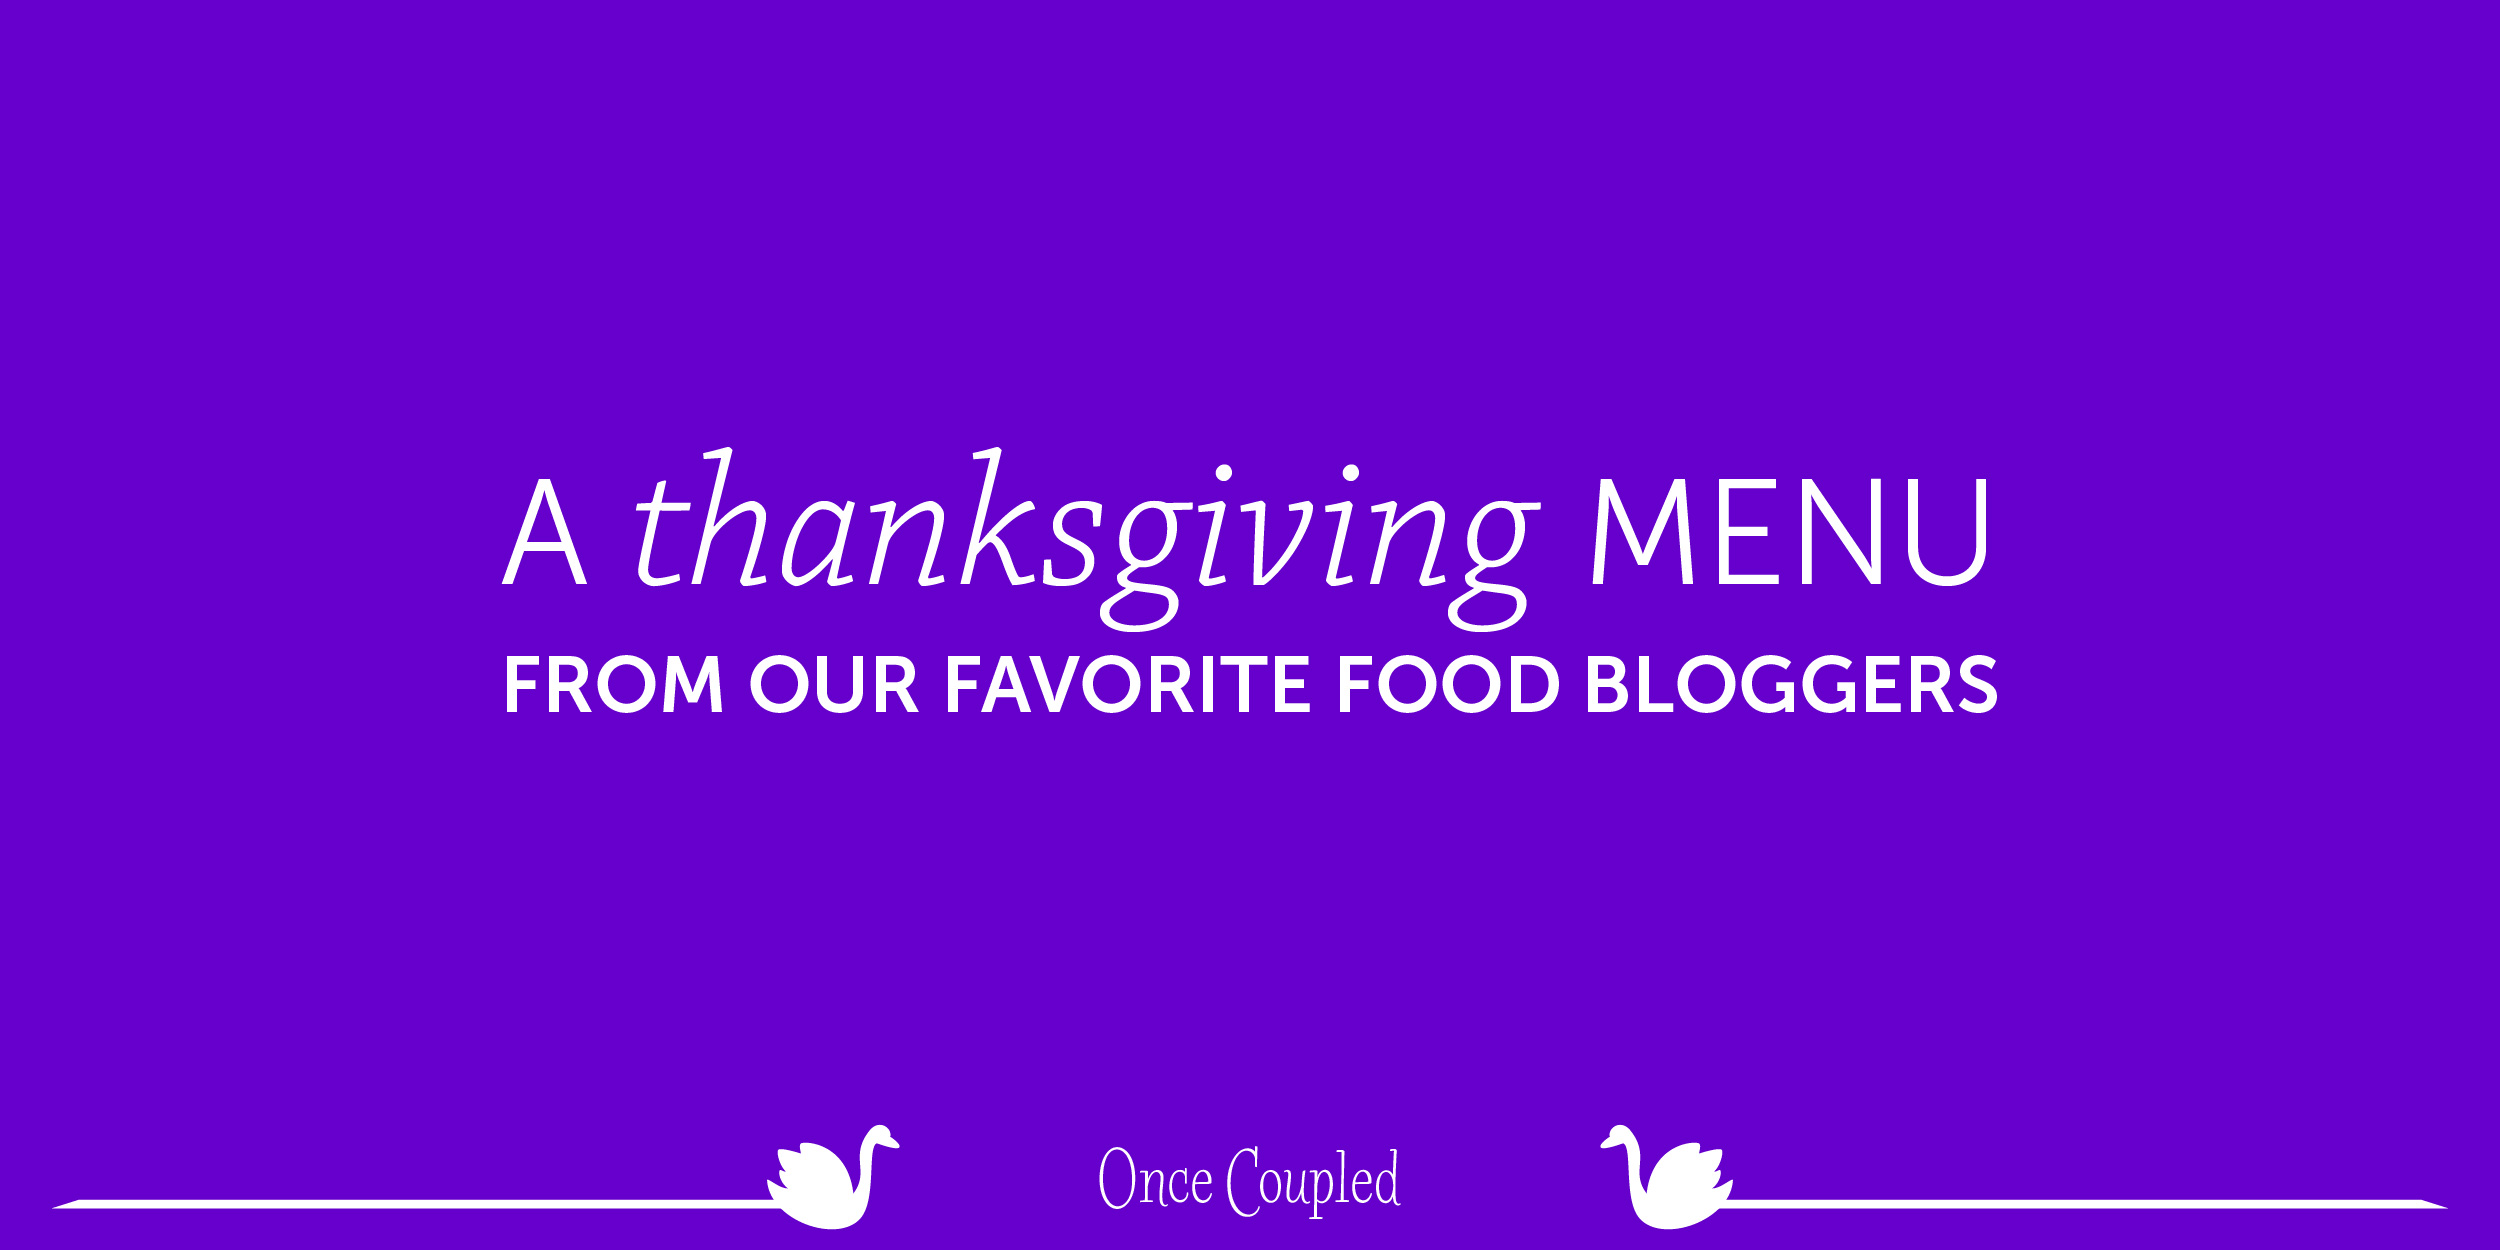 A Thanksgiving Menu from Our Favorite Food Bloggers